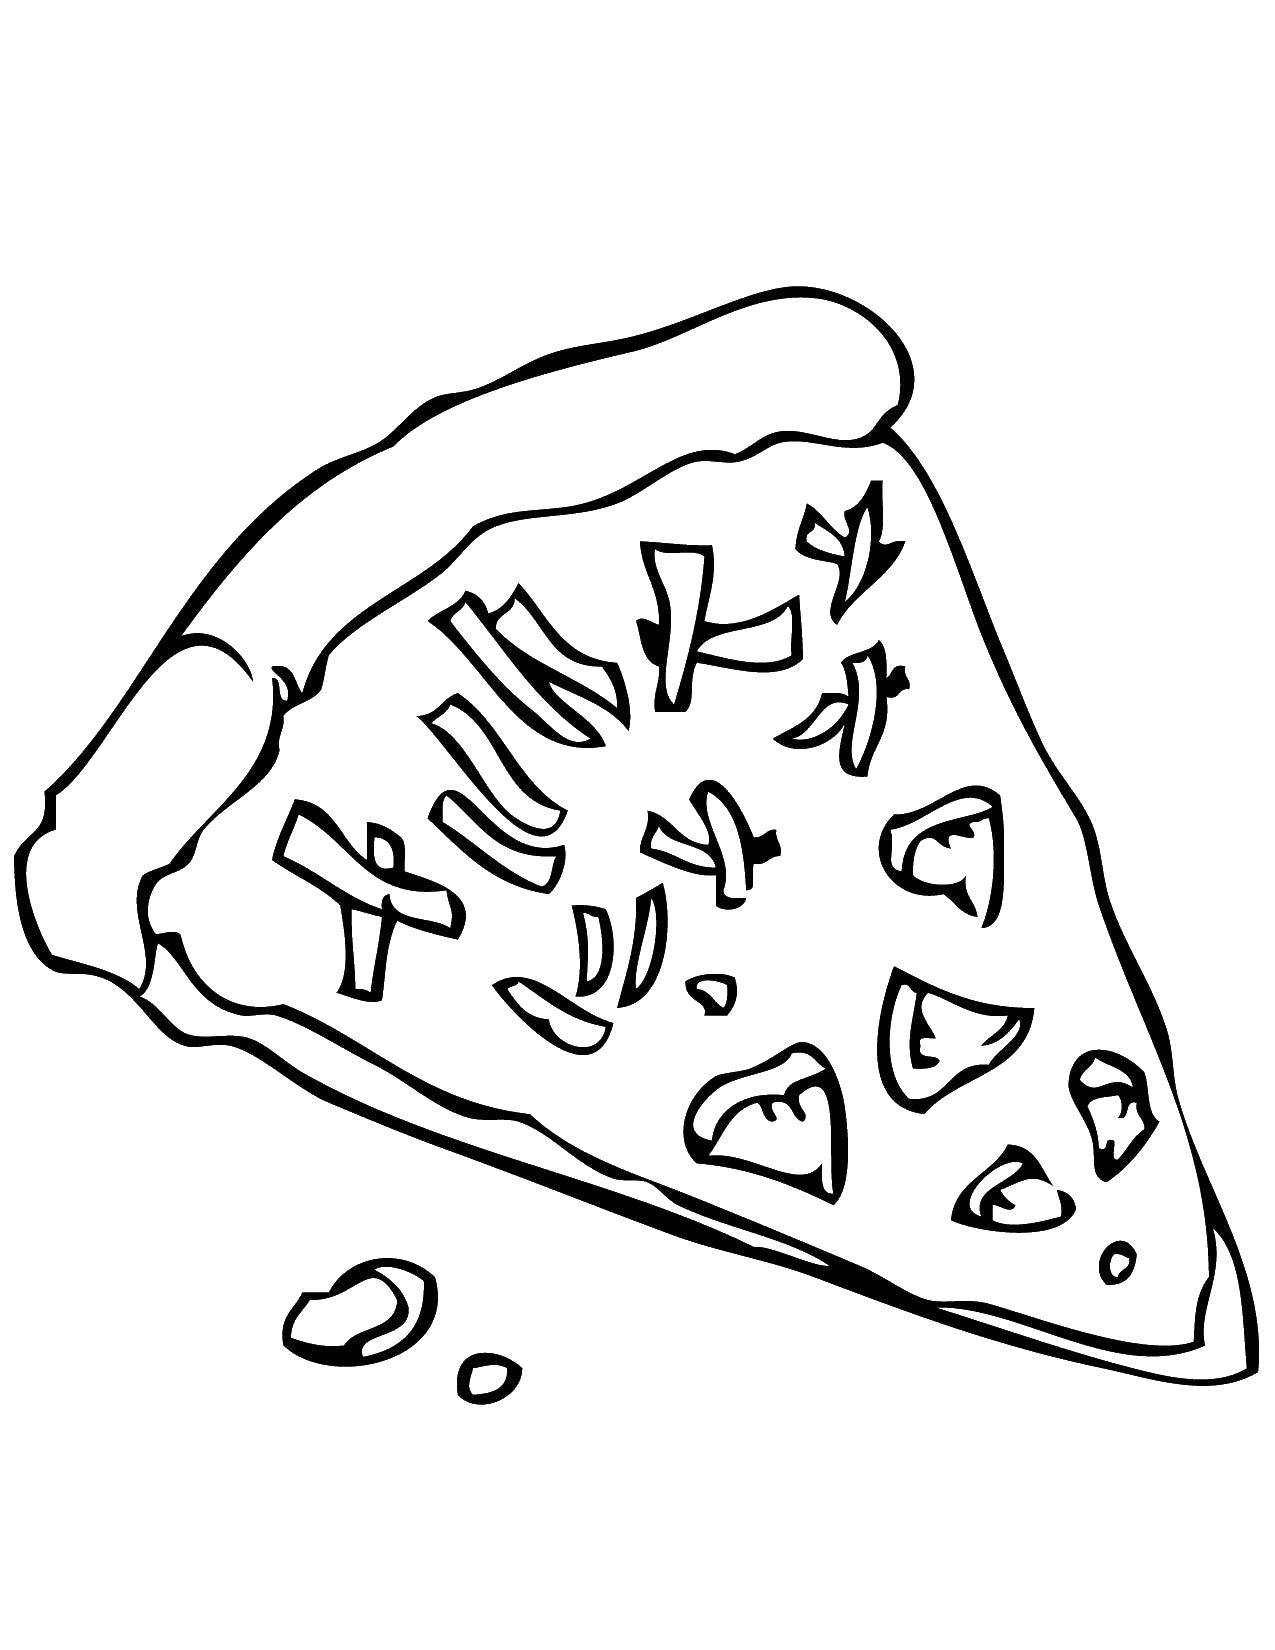 Coloring A slice of pizza. Category fast food. Tags:  pizza , mushrooms, .